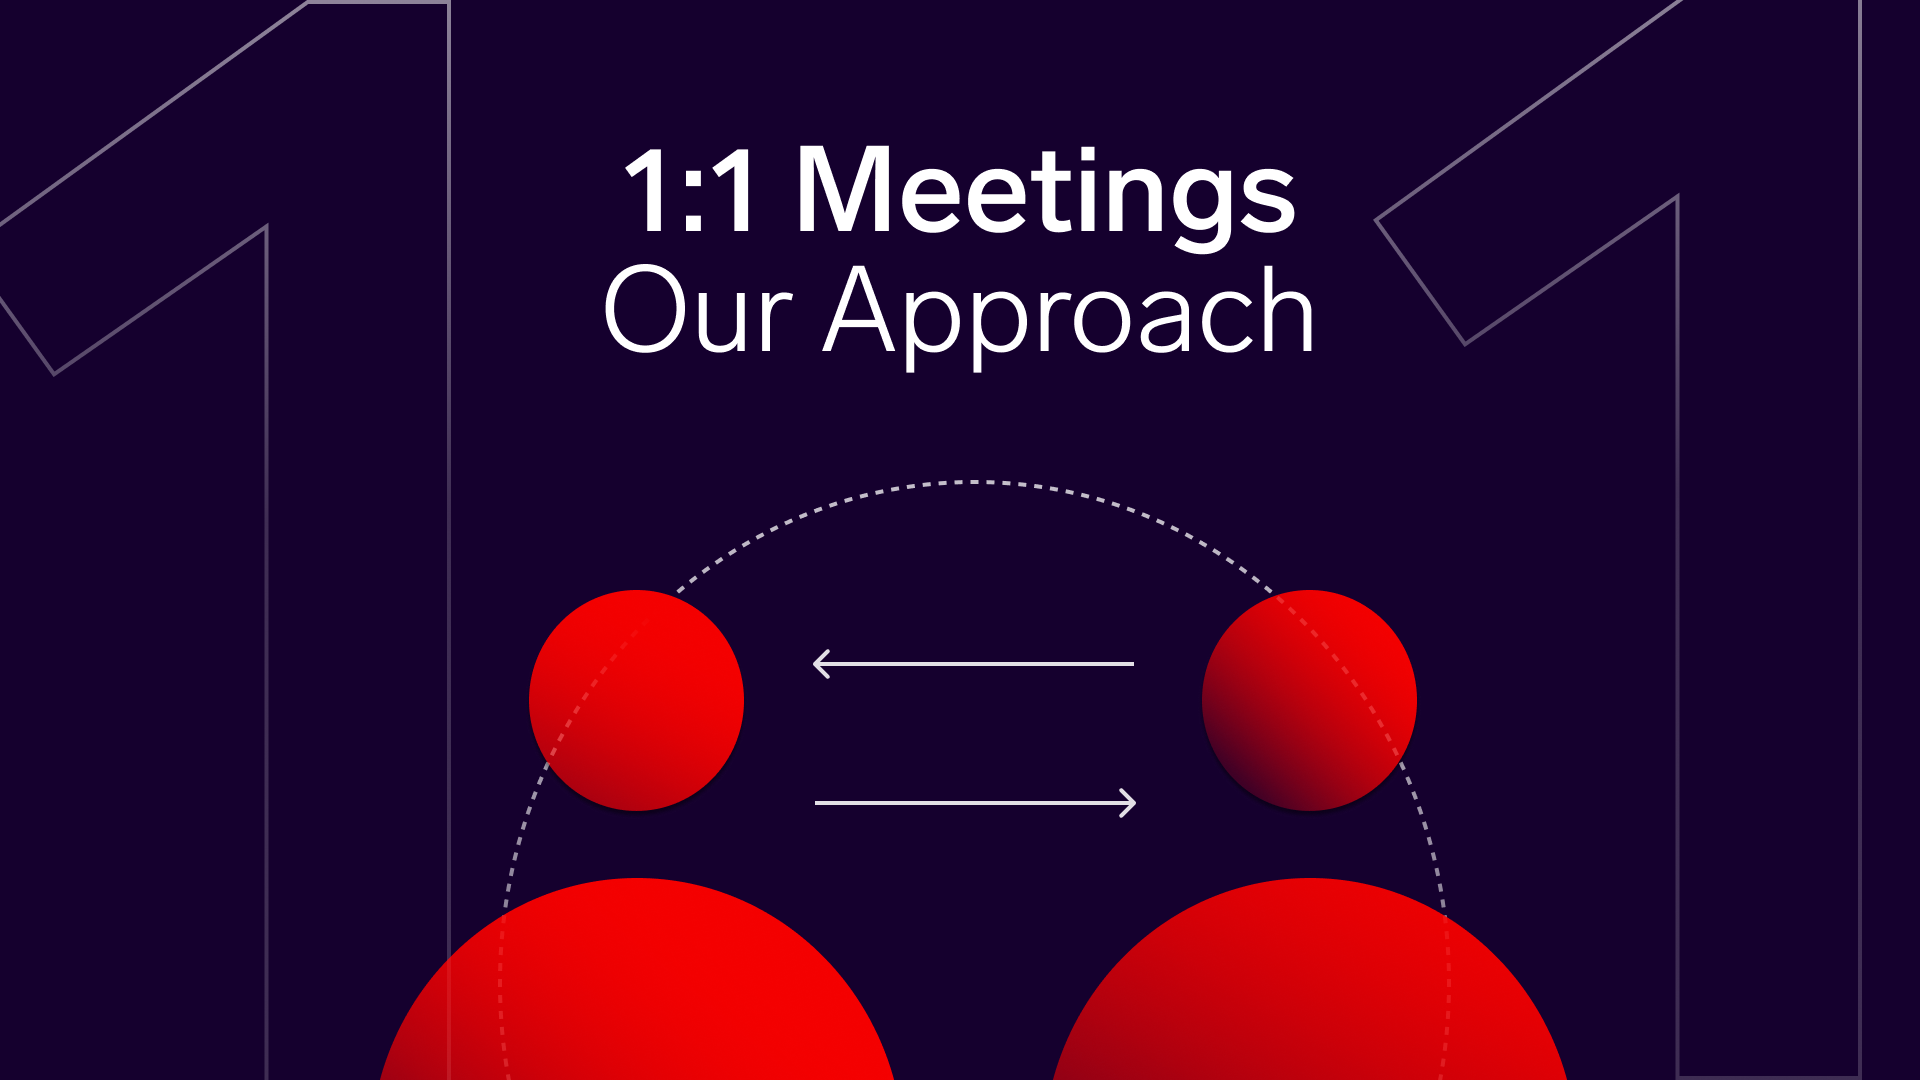 How do we approach 1:1 meetings 